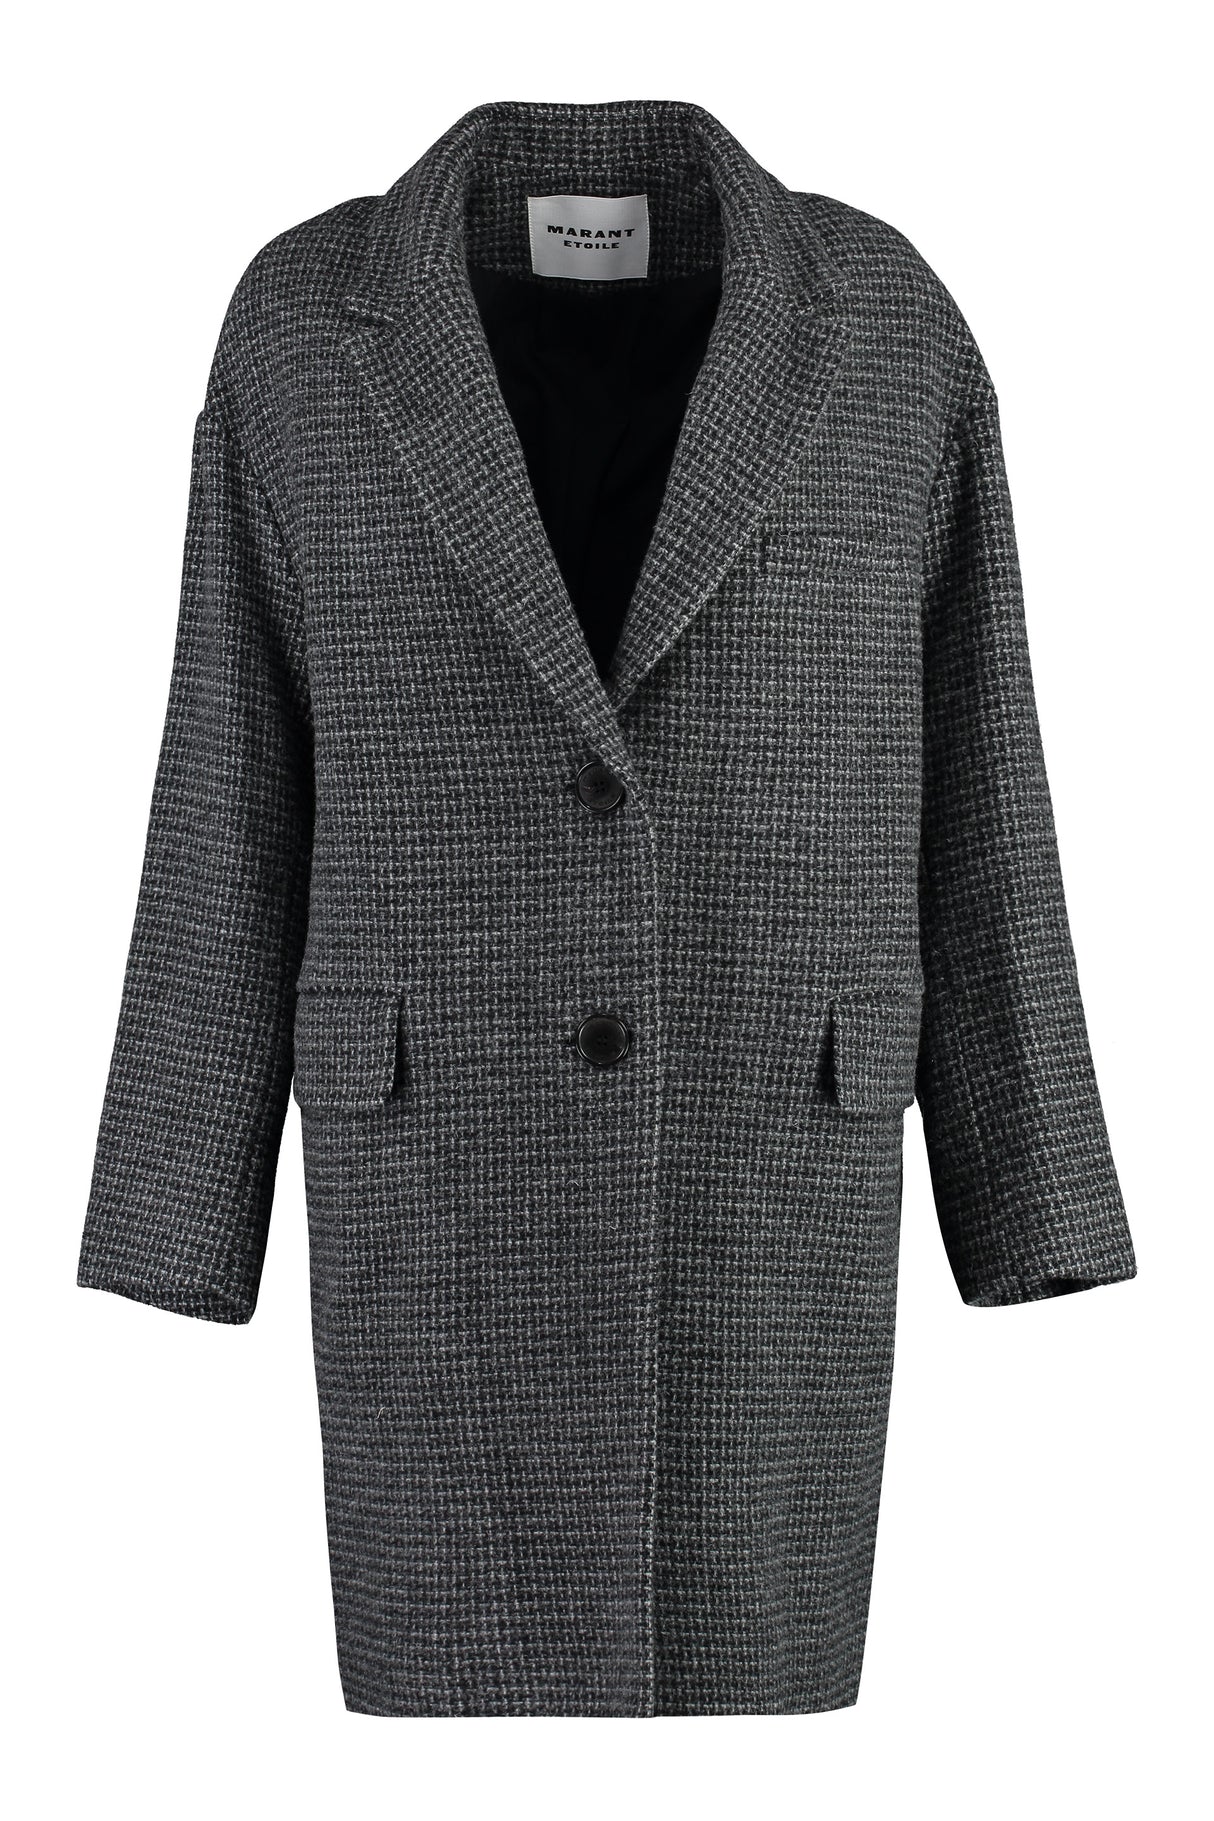 ISABEL MARANT ETOILE Grey Single-Breasted Wool Jacket for Women - FW23 Collection